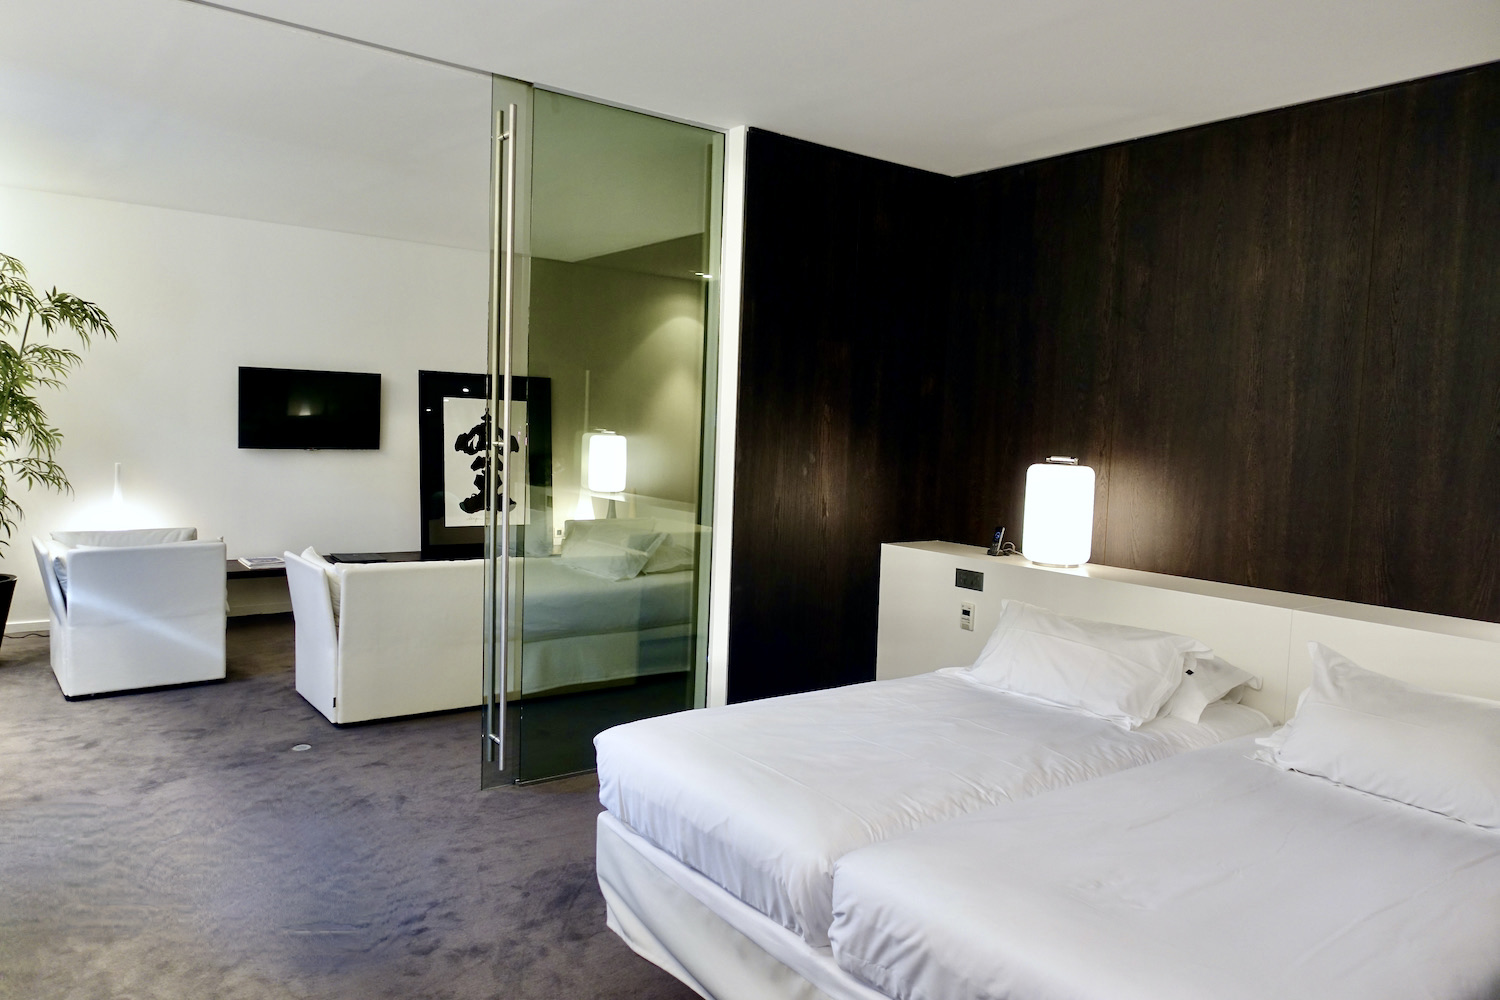 Staying & dining in style in the Provence/France: Designer Suite at Hotel B Design & Spa Paradou